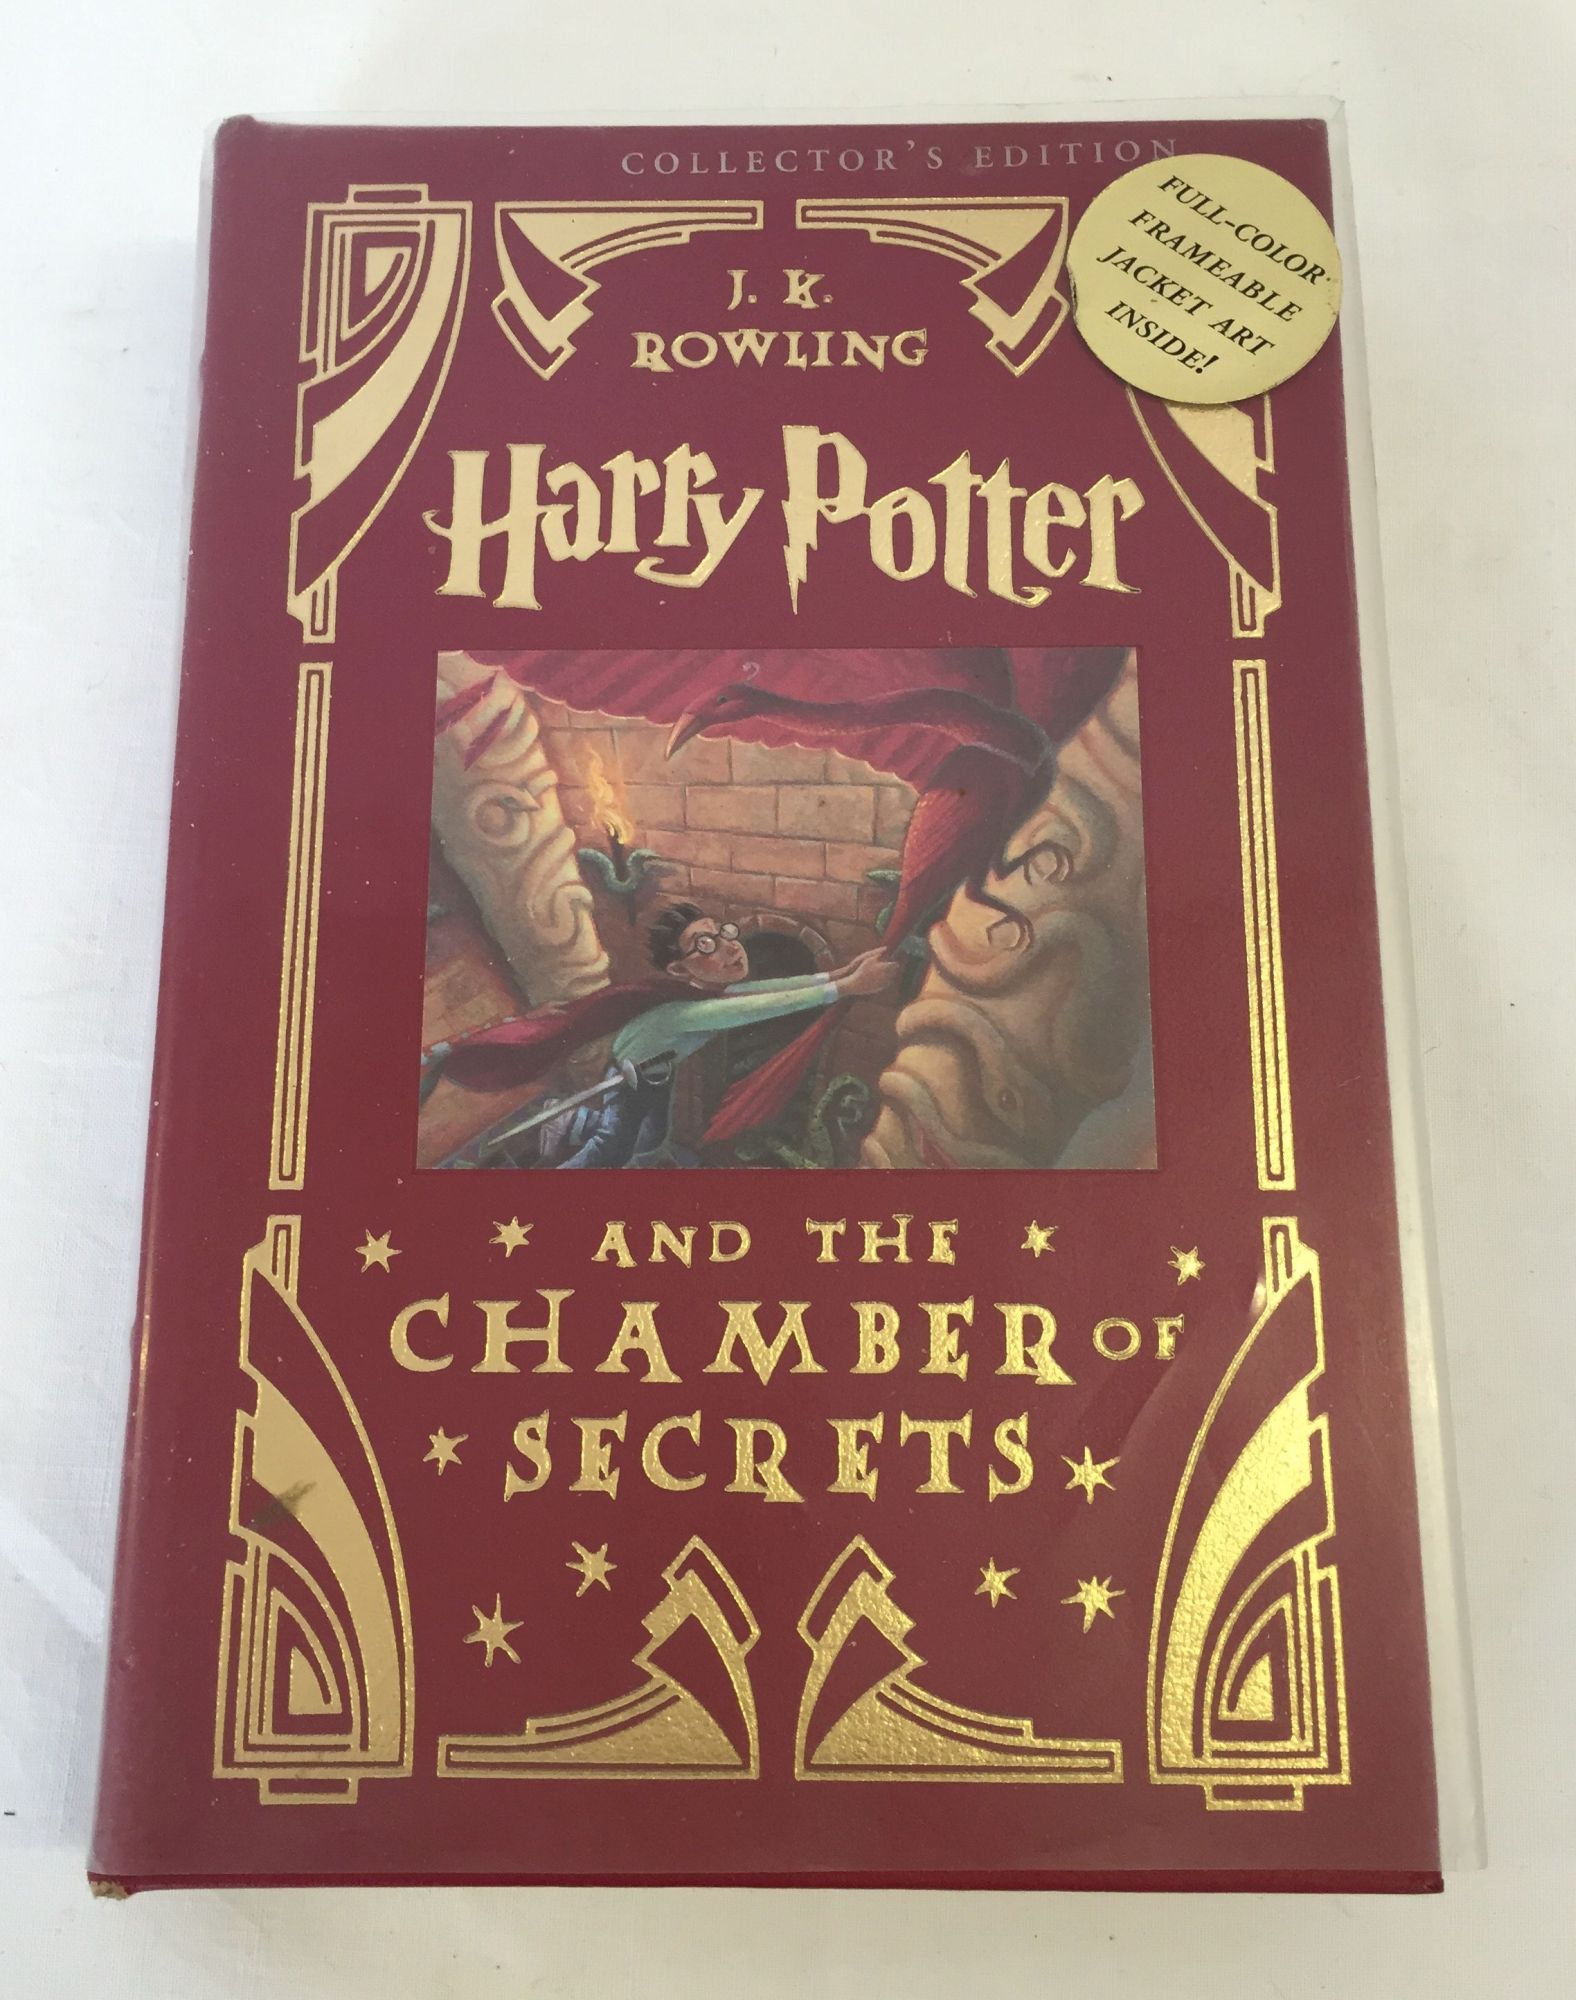 Harry Potter and the Chamber of Secrets J.K Rowling US Collectors 1st Edition. Unread in red leather